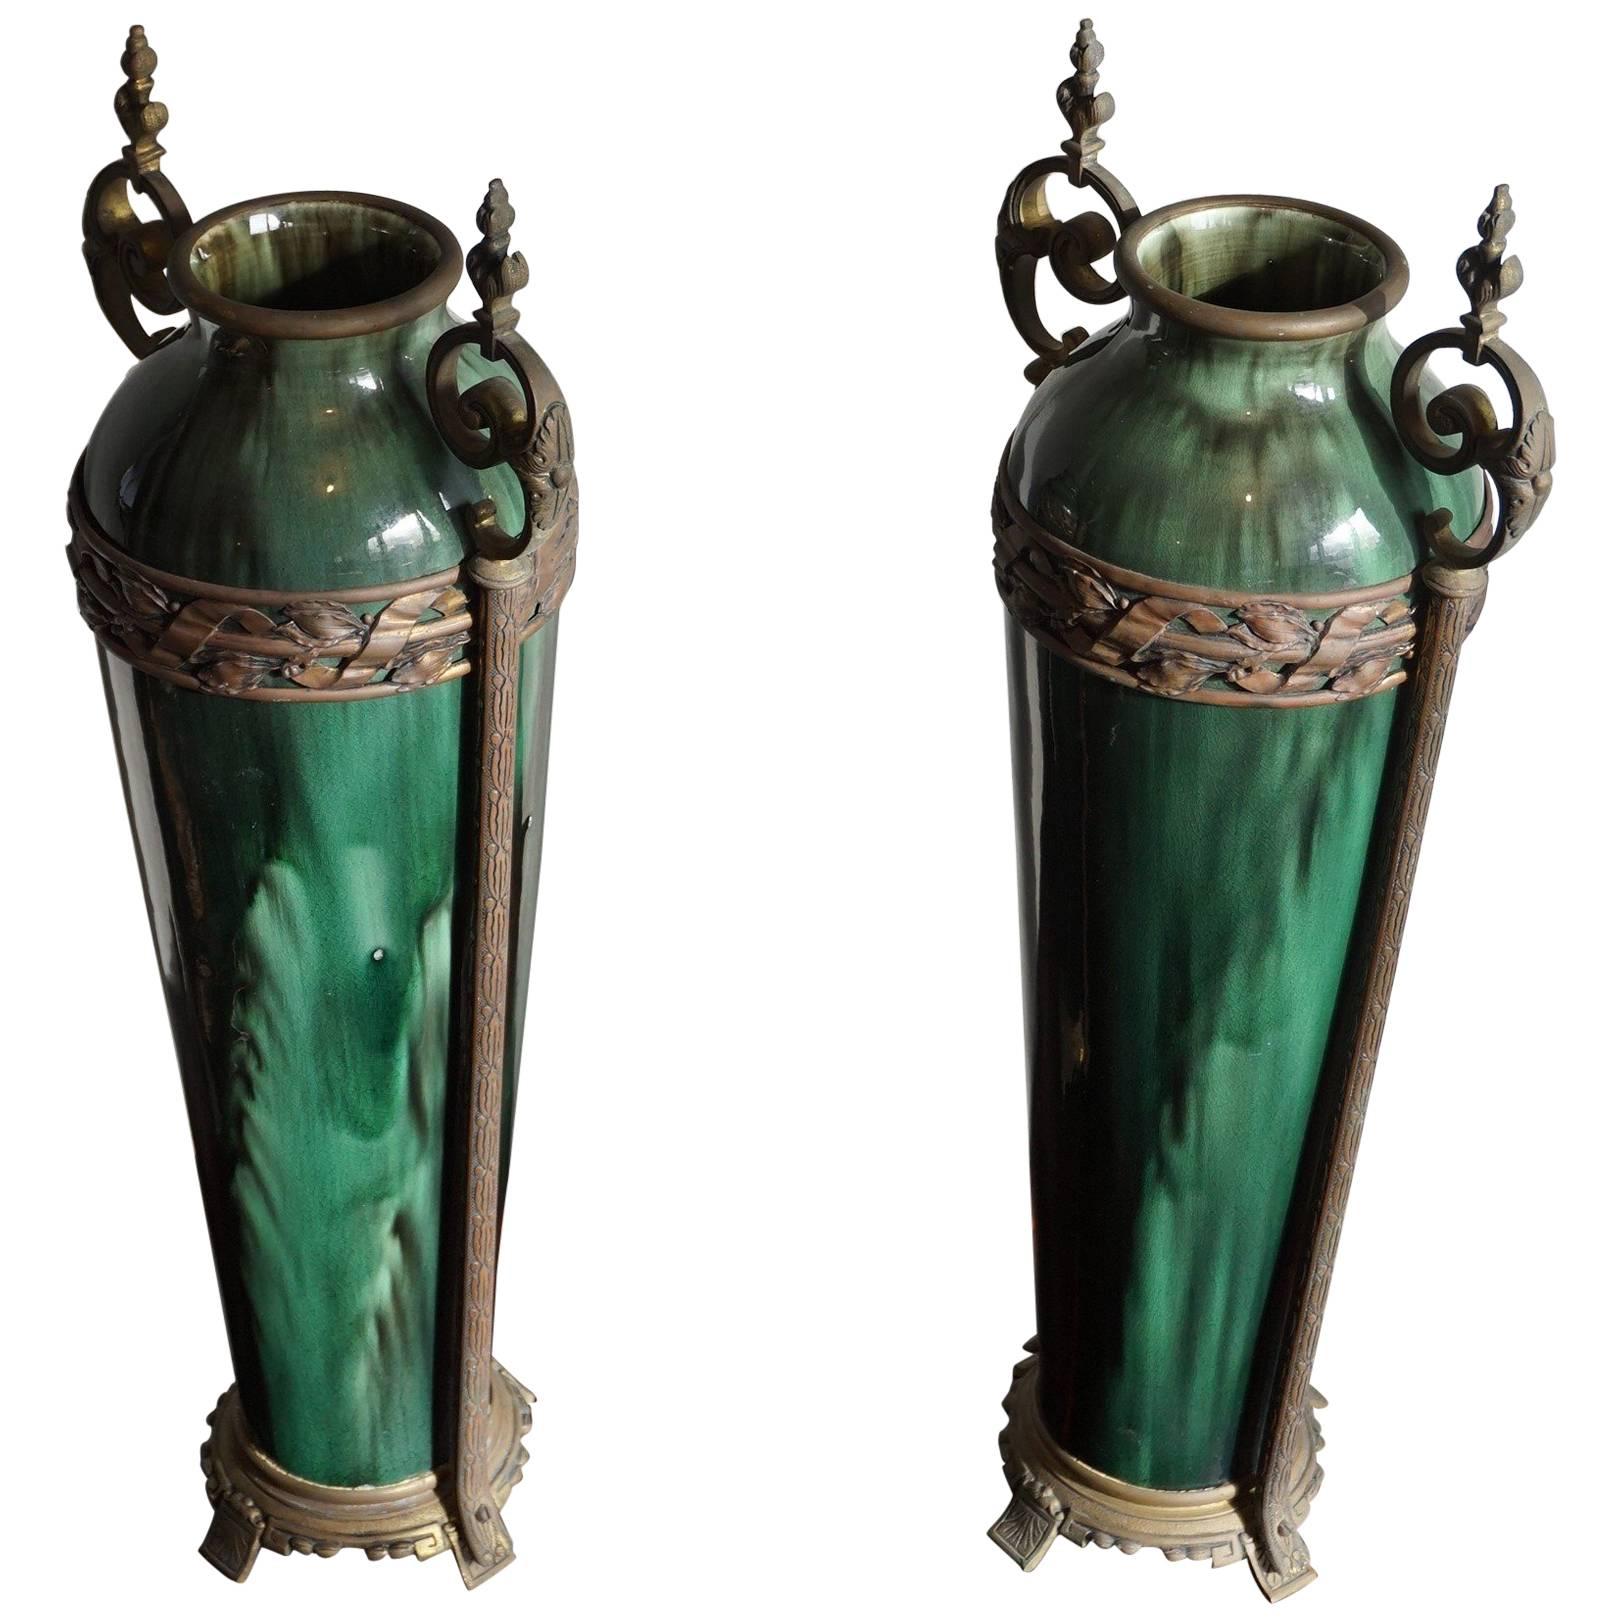 Stunning Pair of Antique French Green Ceramic Vases with Bronze Base & Handles